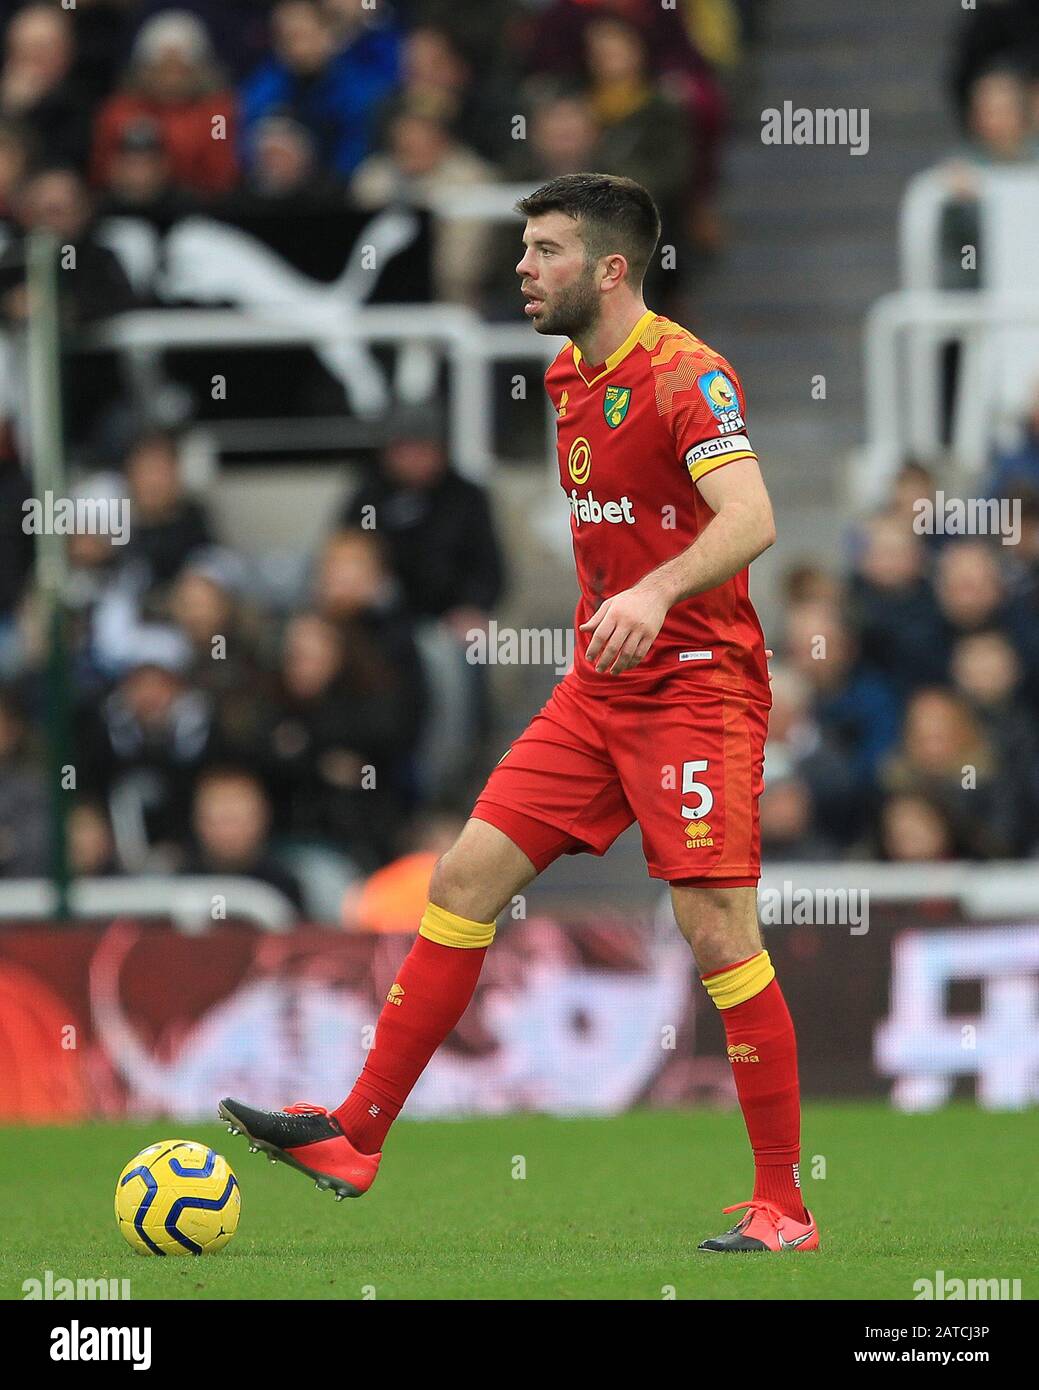 NEWCASTLE UPON TYNE, ENGLAND - FEBRUARY 1ST Grant Hanley of Norwich City during the Premier League match between Newcastle United and Norwich City at St. James's Park, Newcastle on Saturday 1st February 2020. (Credit: Mark Fletcher | MI News)  Photograph may only be used for newspaper and/or magazine editorial purposes, license required for commercial use Stock Photo